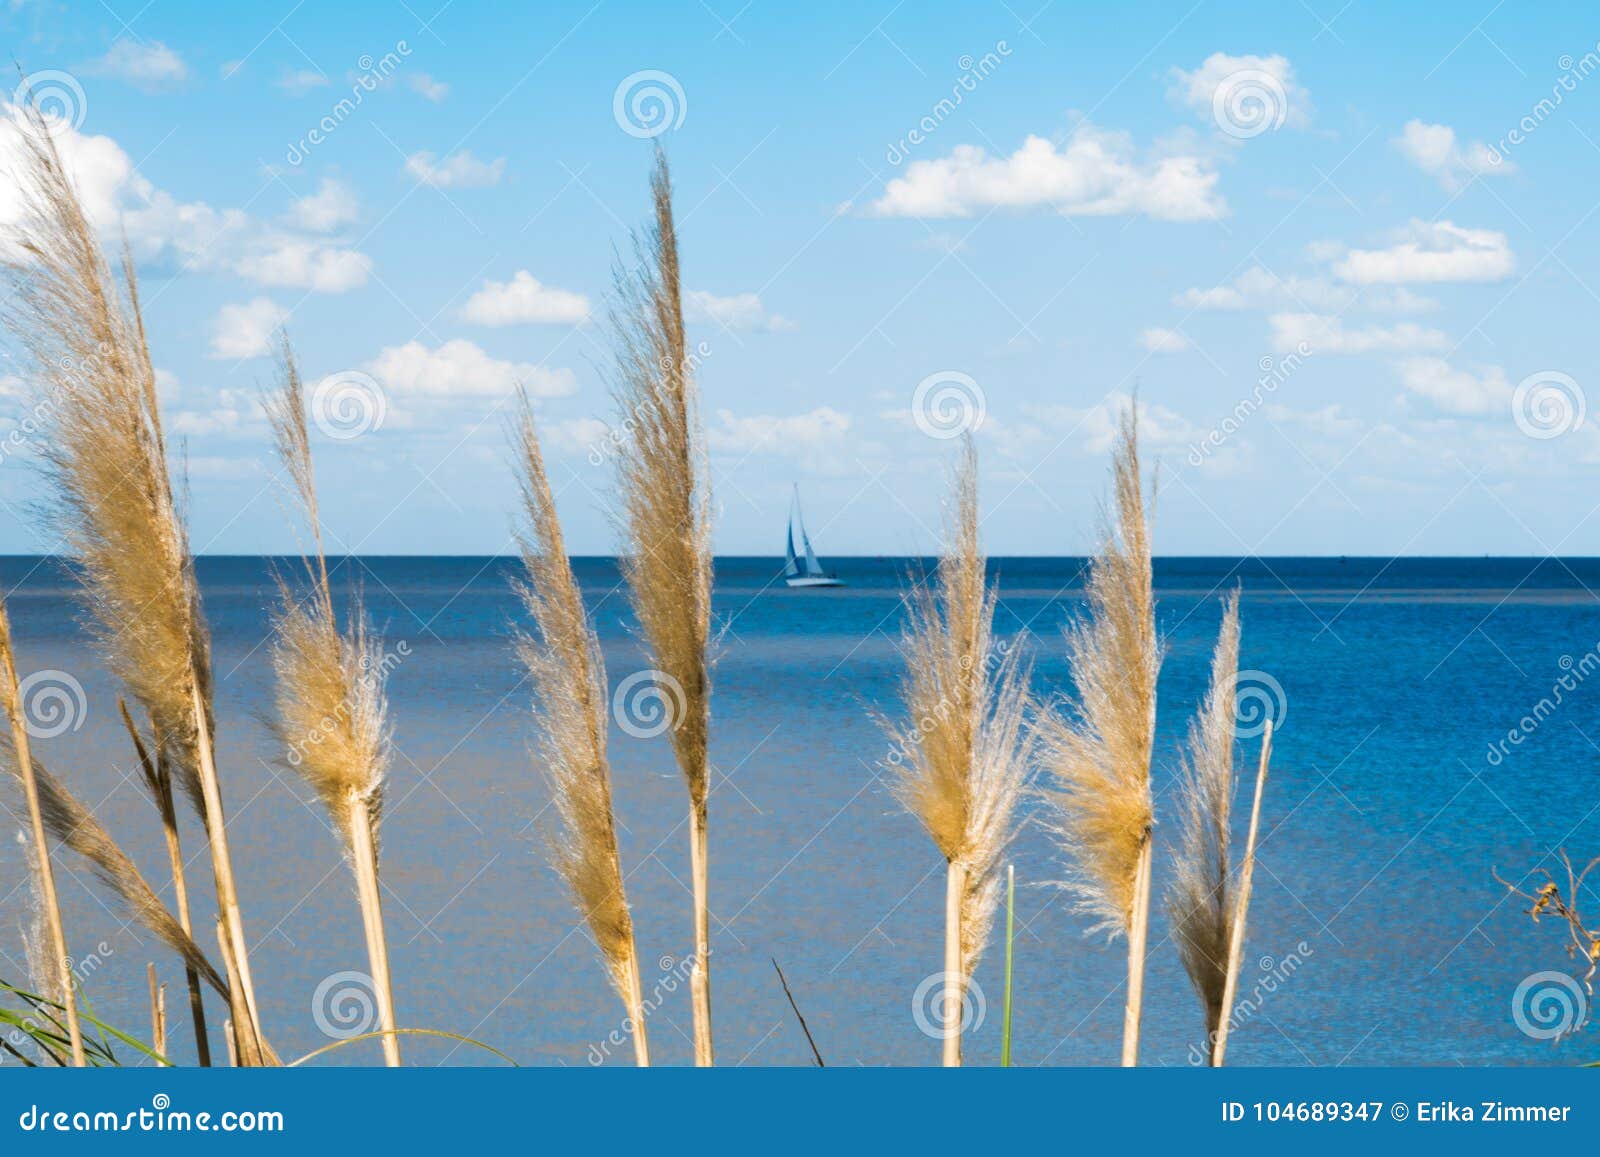 beautiful blue sky with white clouds and rio de la plata horizon with vegetation in the foreground